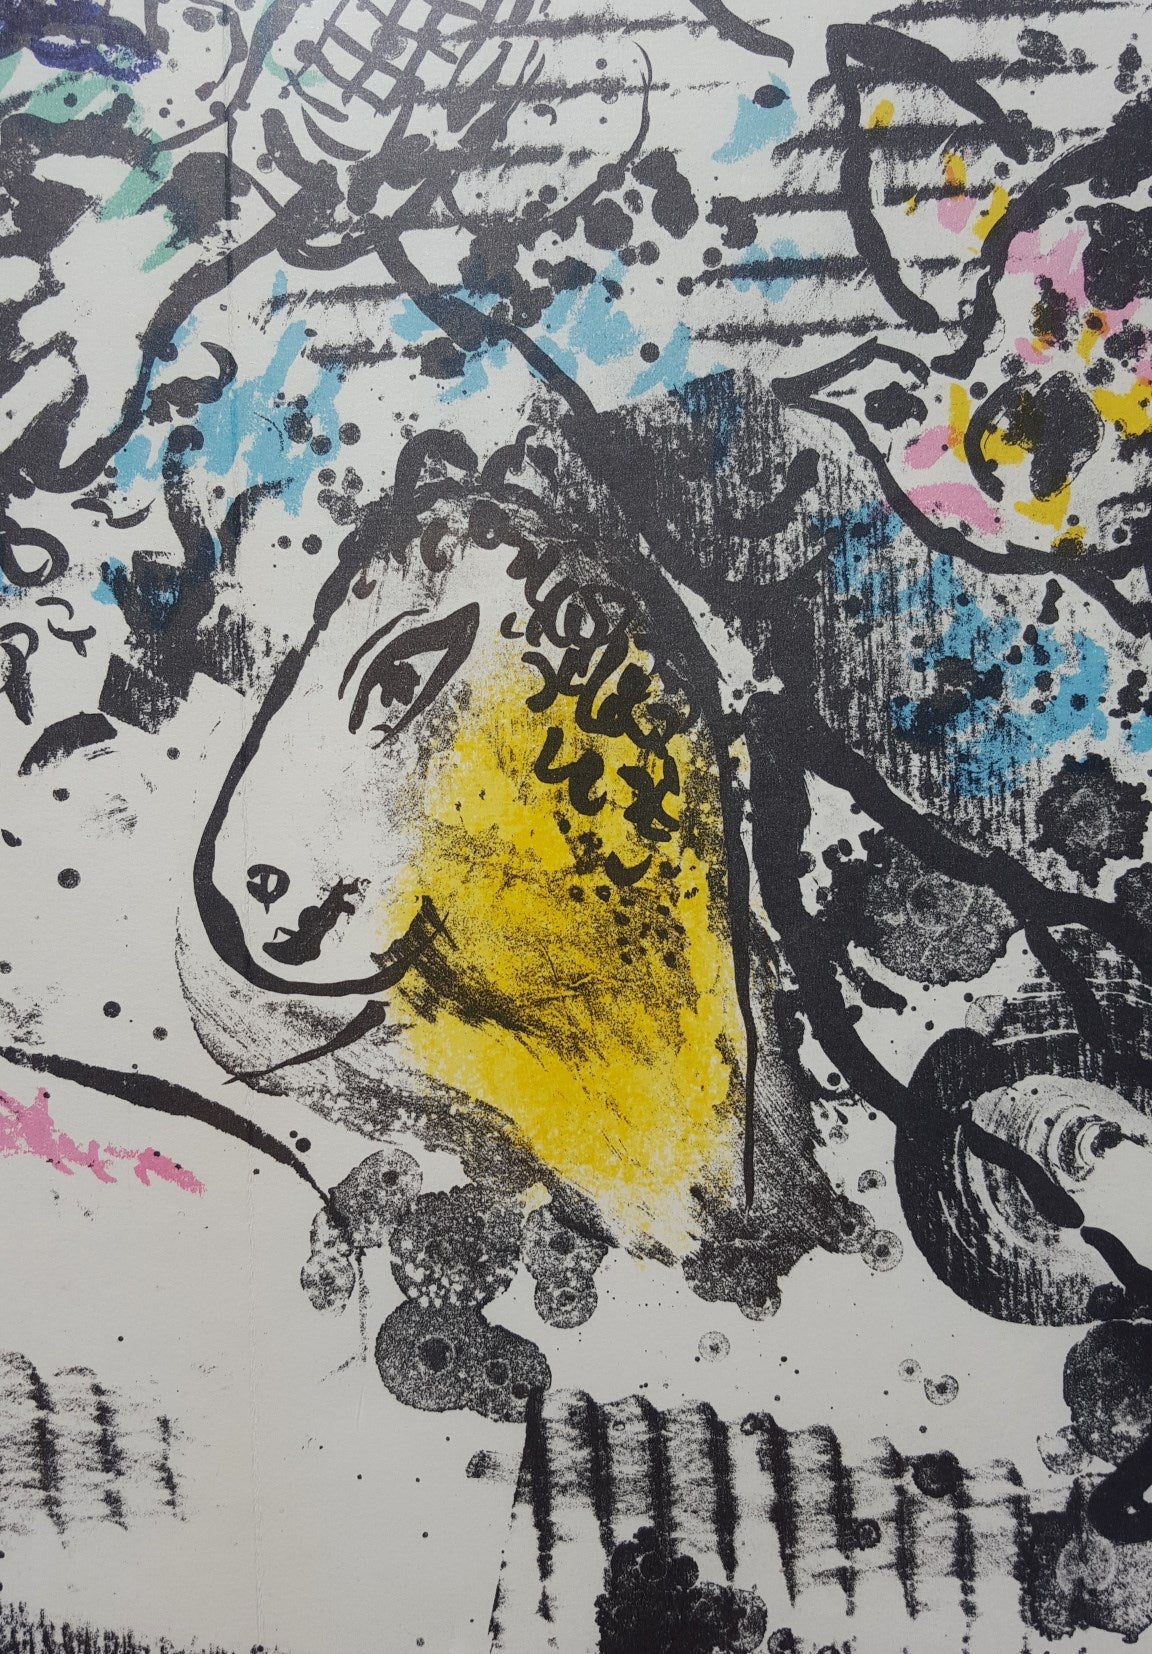 An original unsigned lithograph by Belorussian-born French artist Marc Chagall (1887-1985) titled 